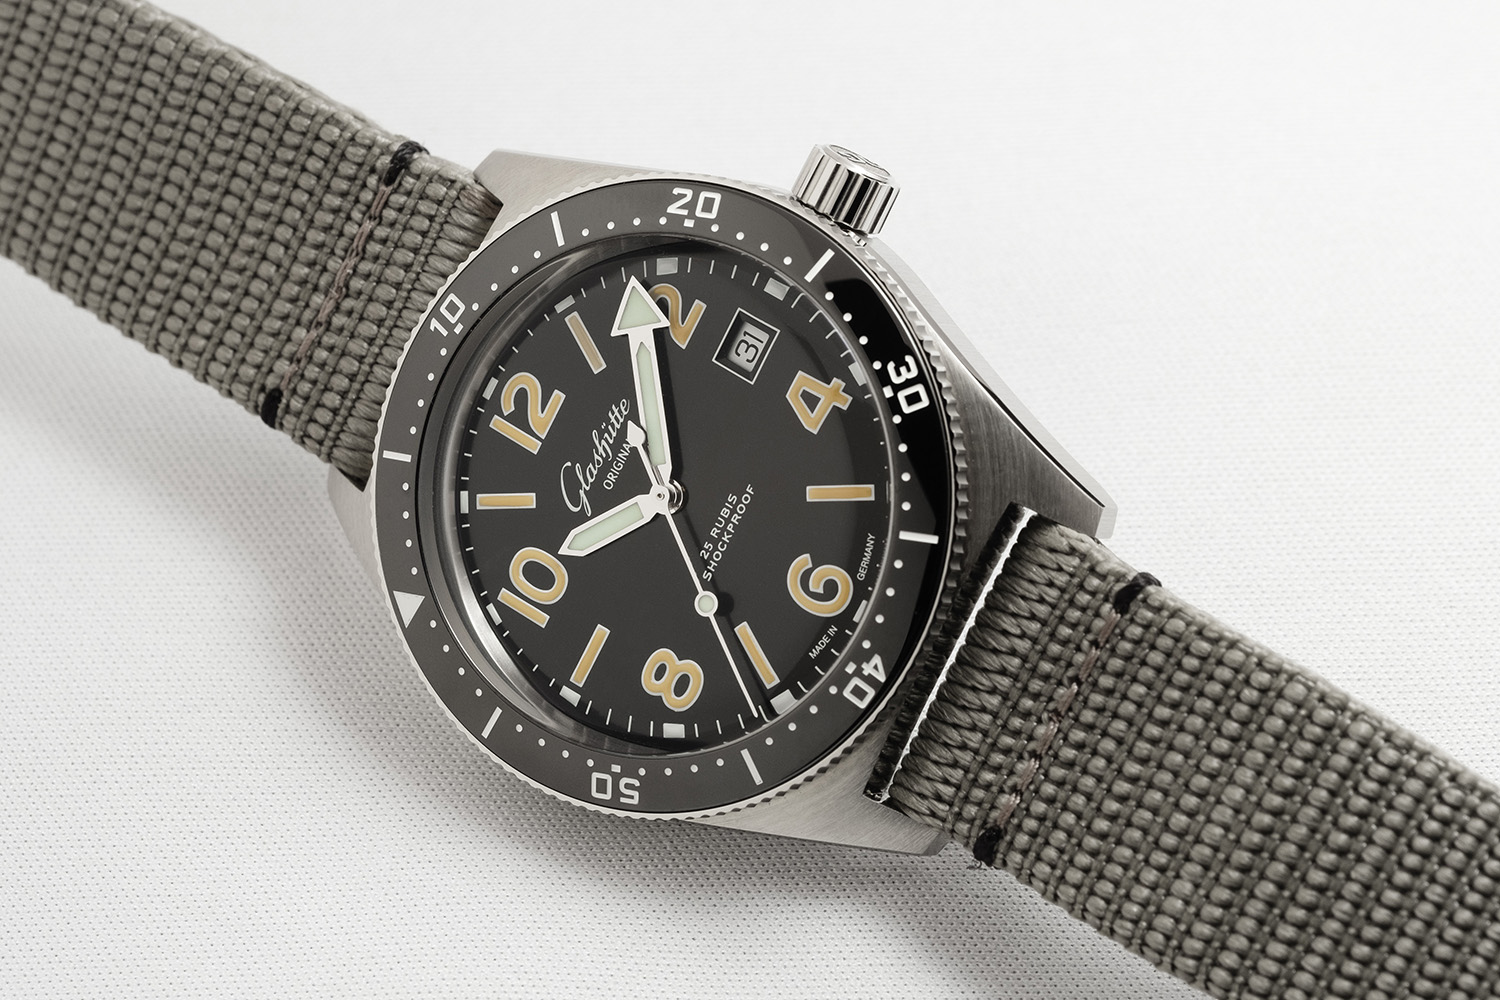 The SeaQ 1969 is a historically accurate revisit of the first Glashütte Original diving watch, and limited to 69 pieces.